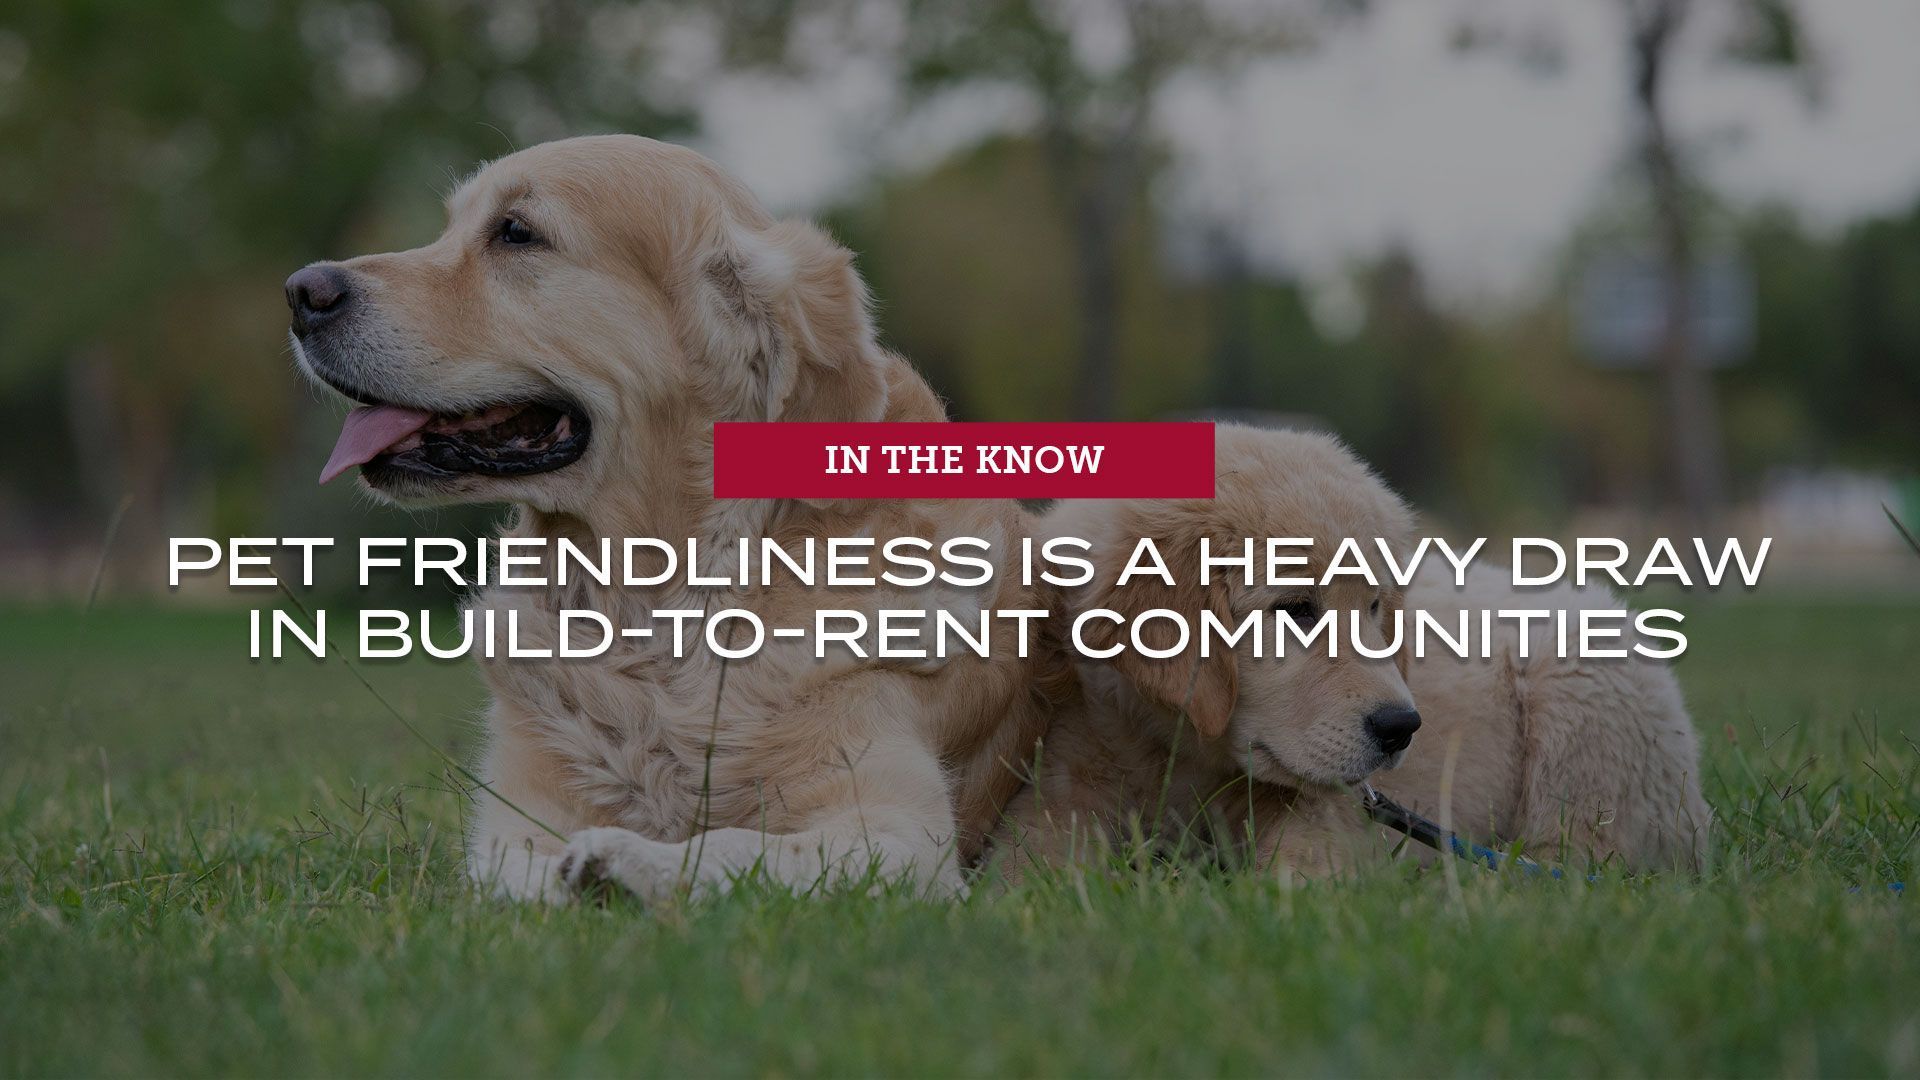 Pet friendliness is a heavy draw in build-to-rent communities